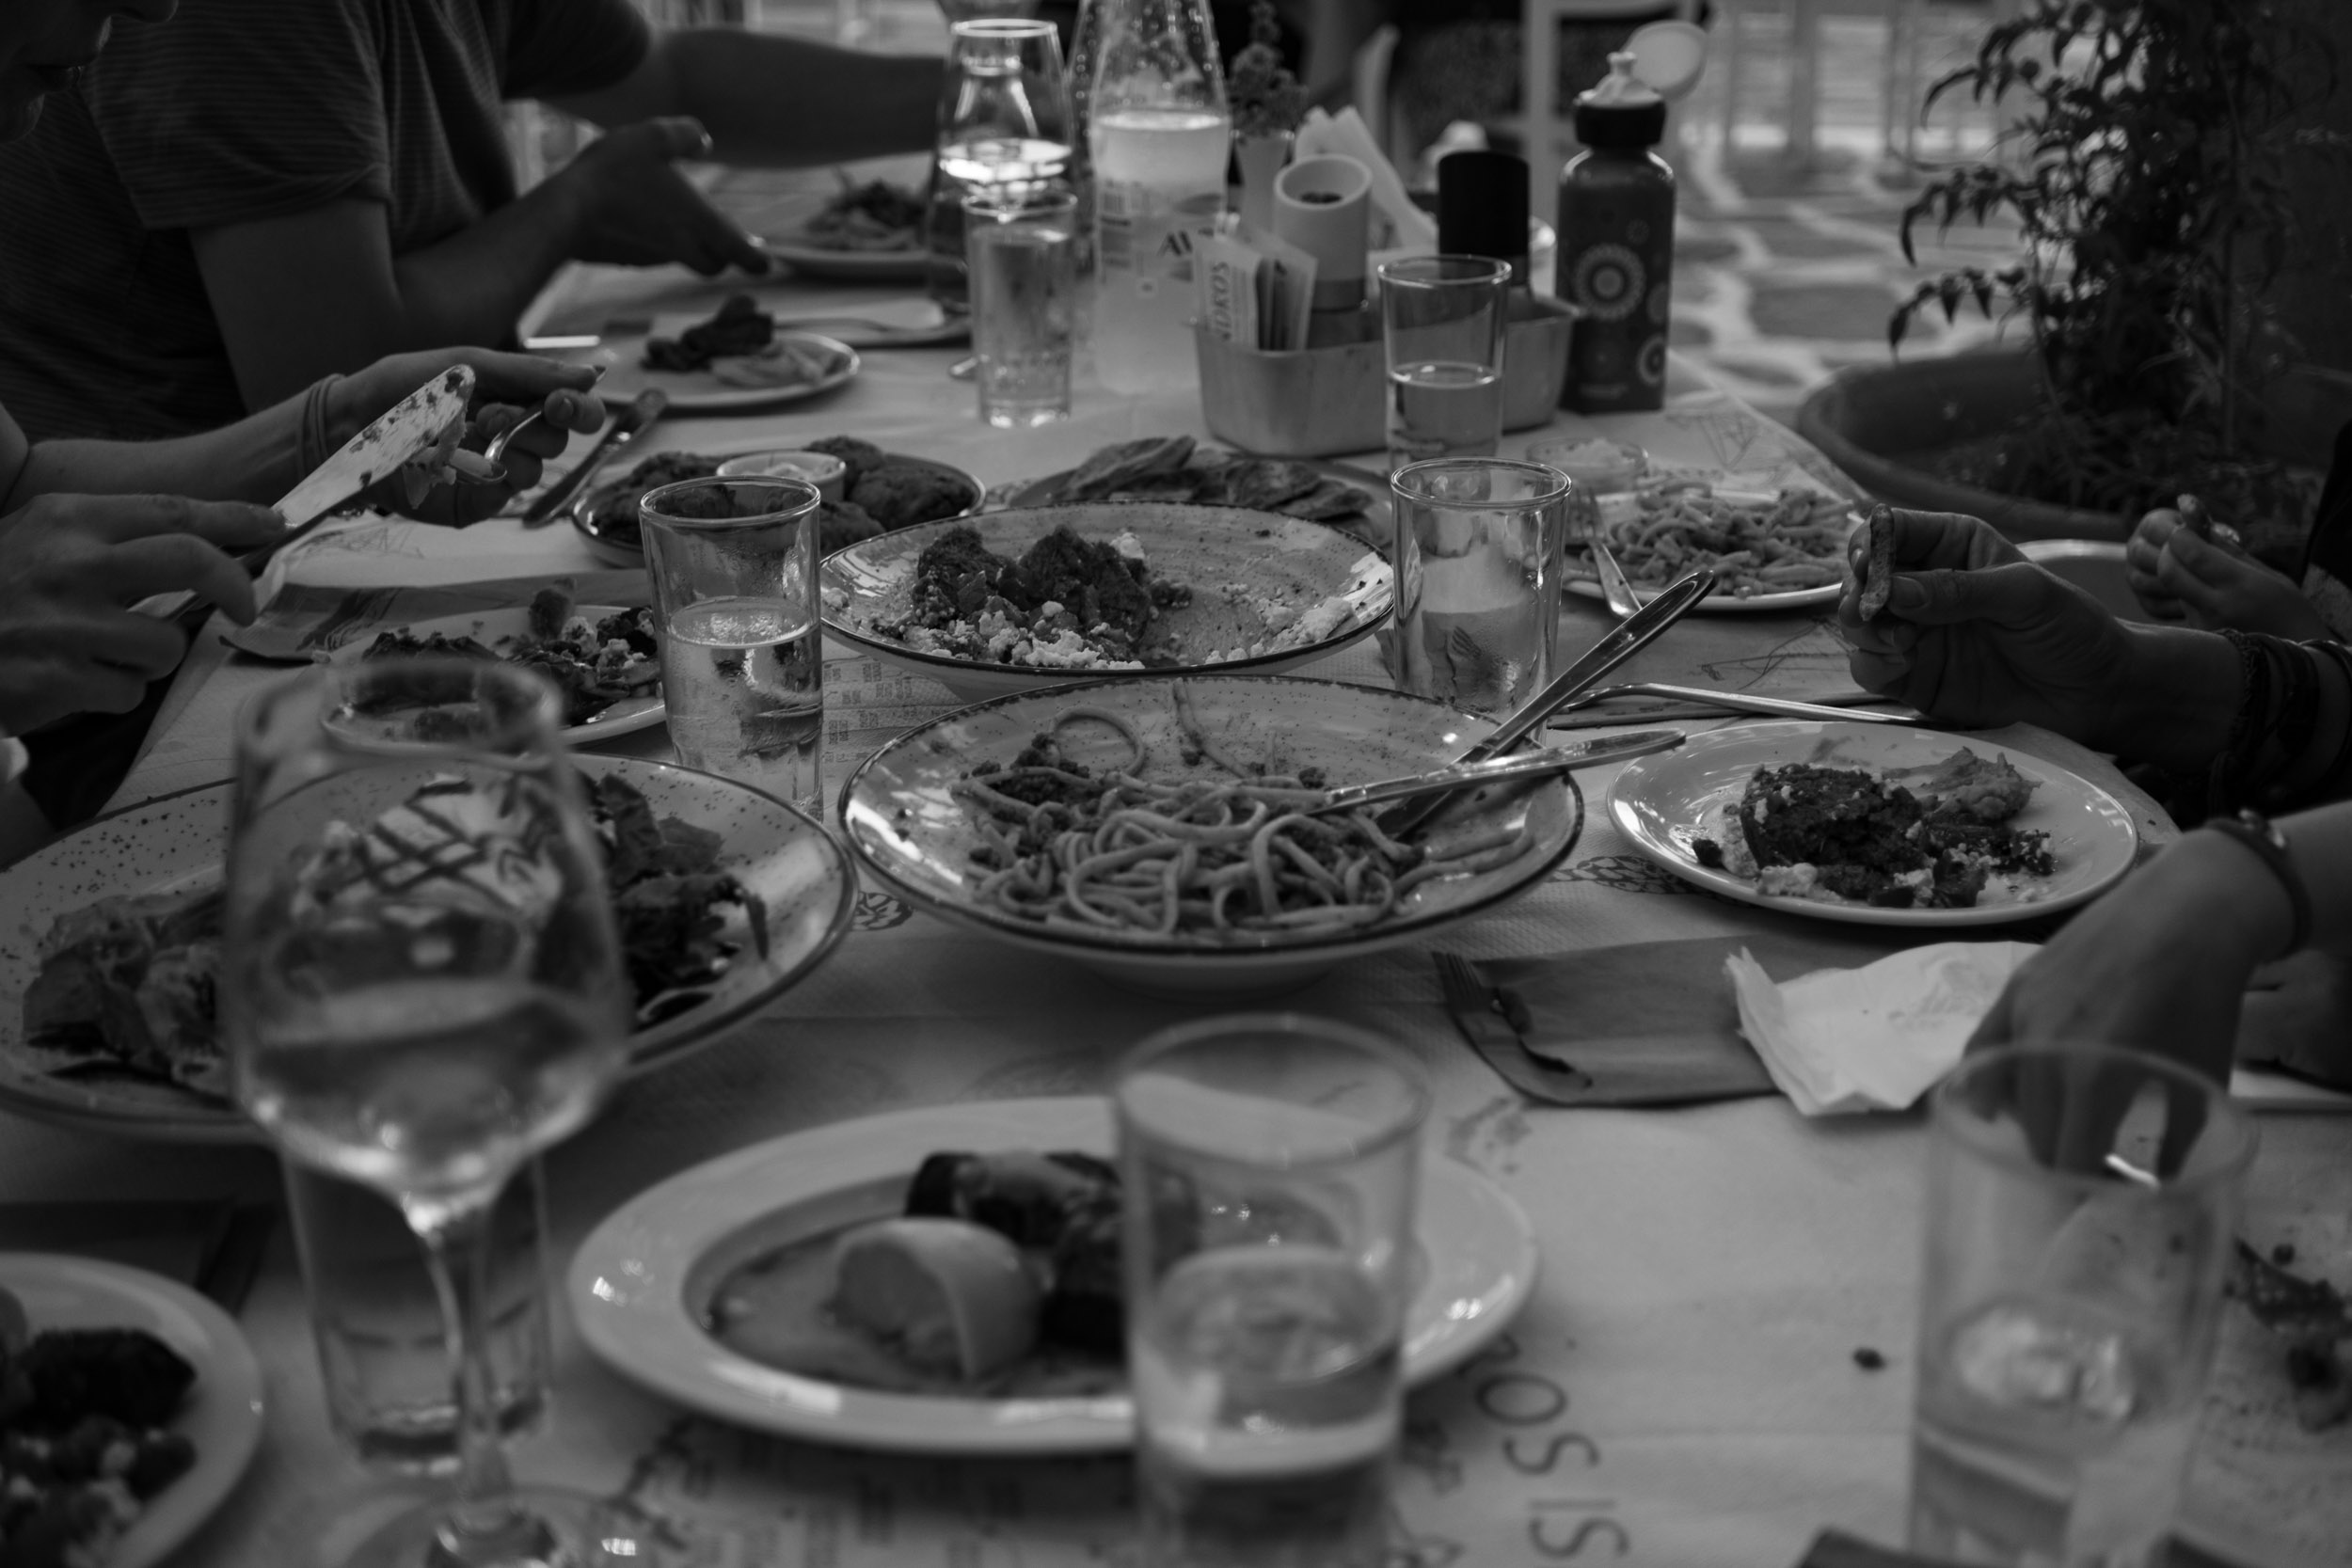 Snapshot of our table during our first meal in Paros, filled with lots of delicious greek food to share.